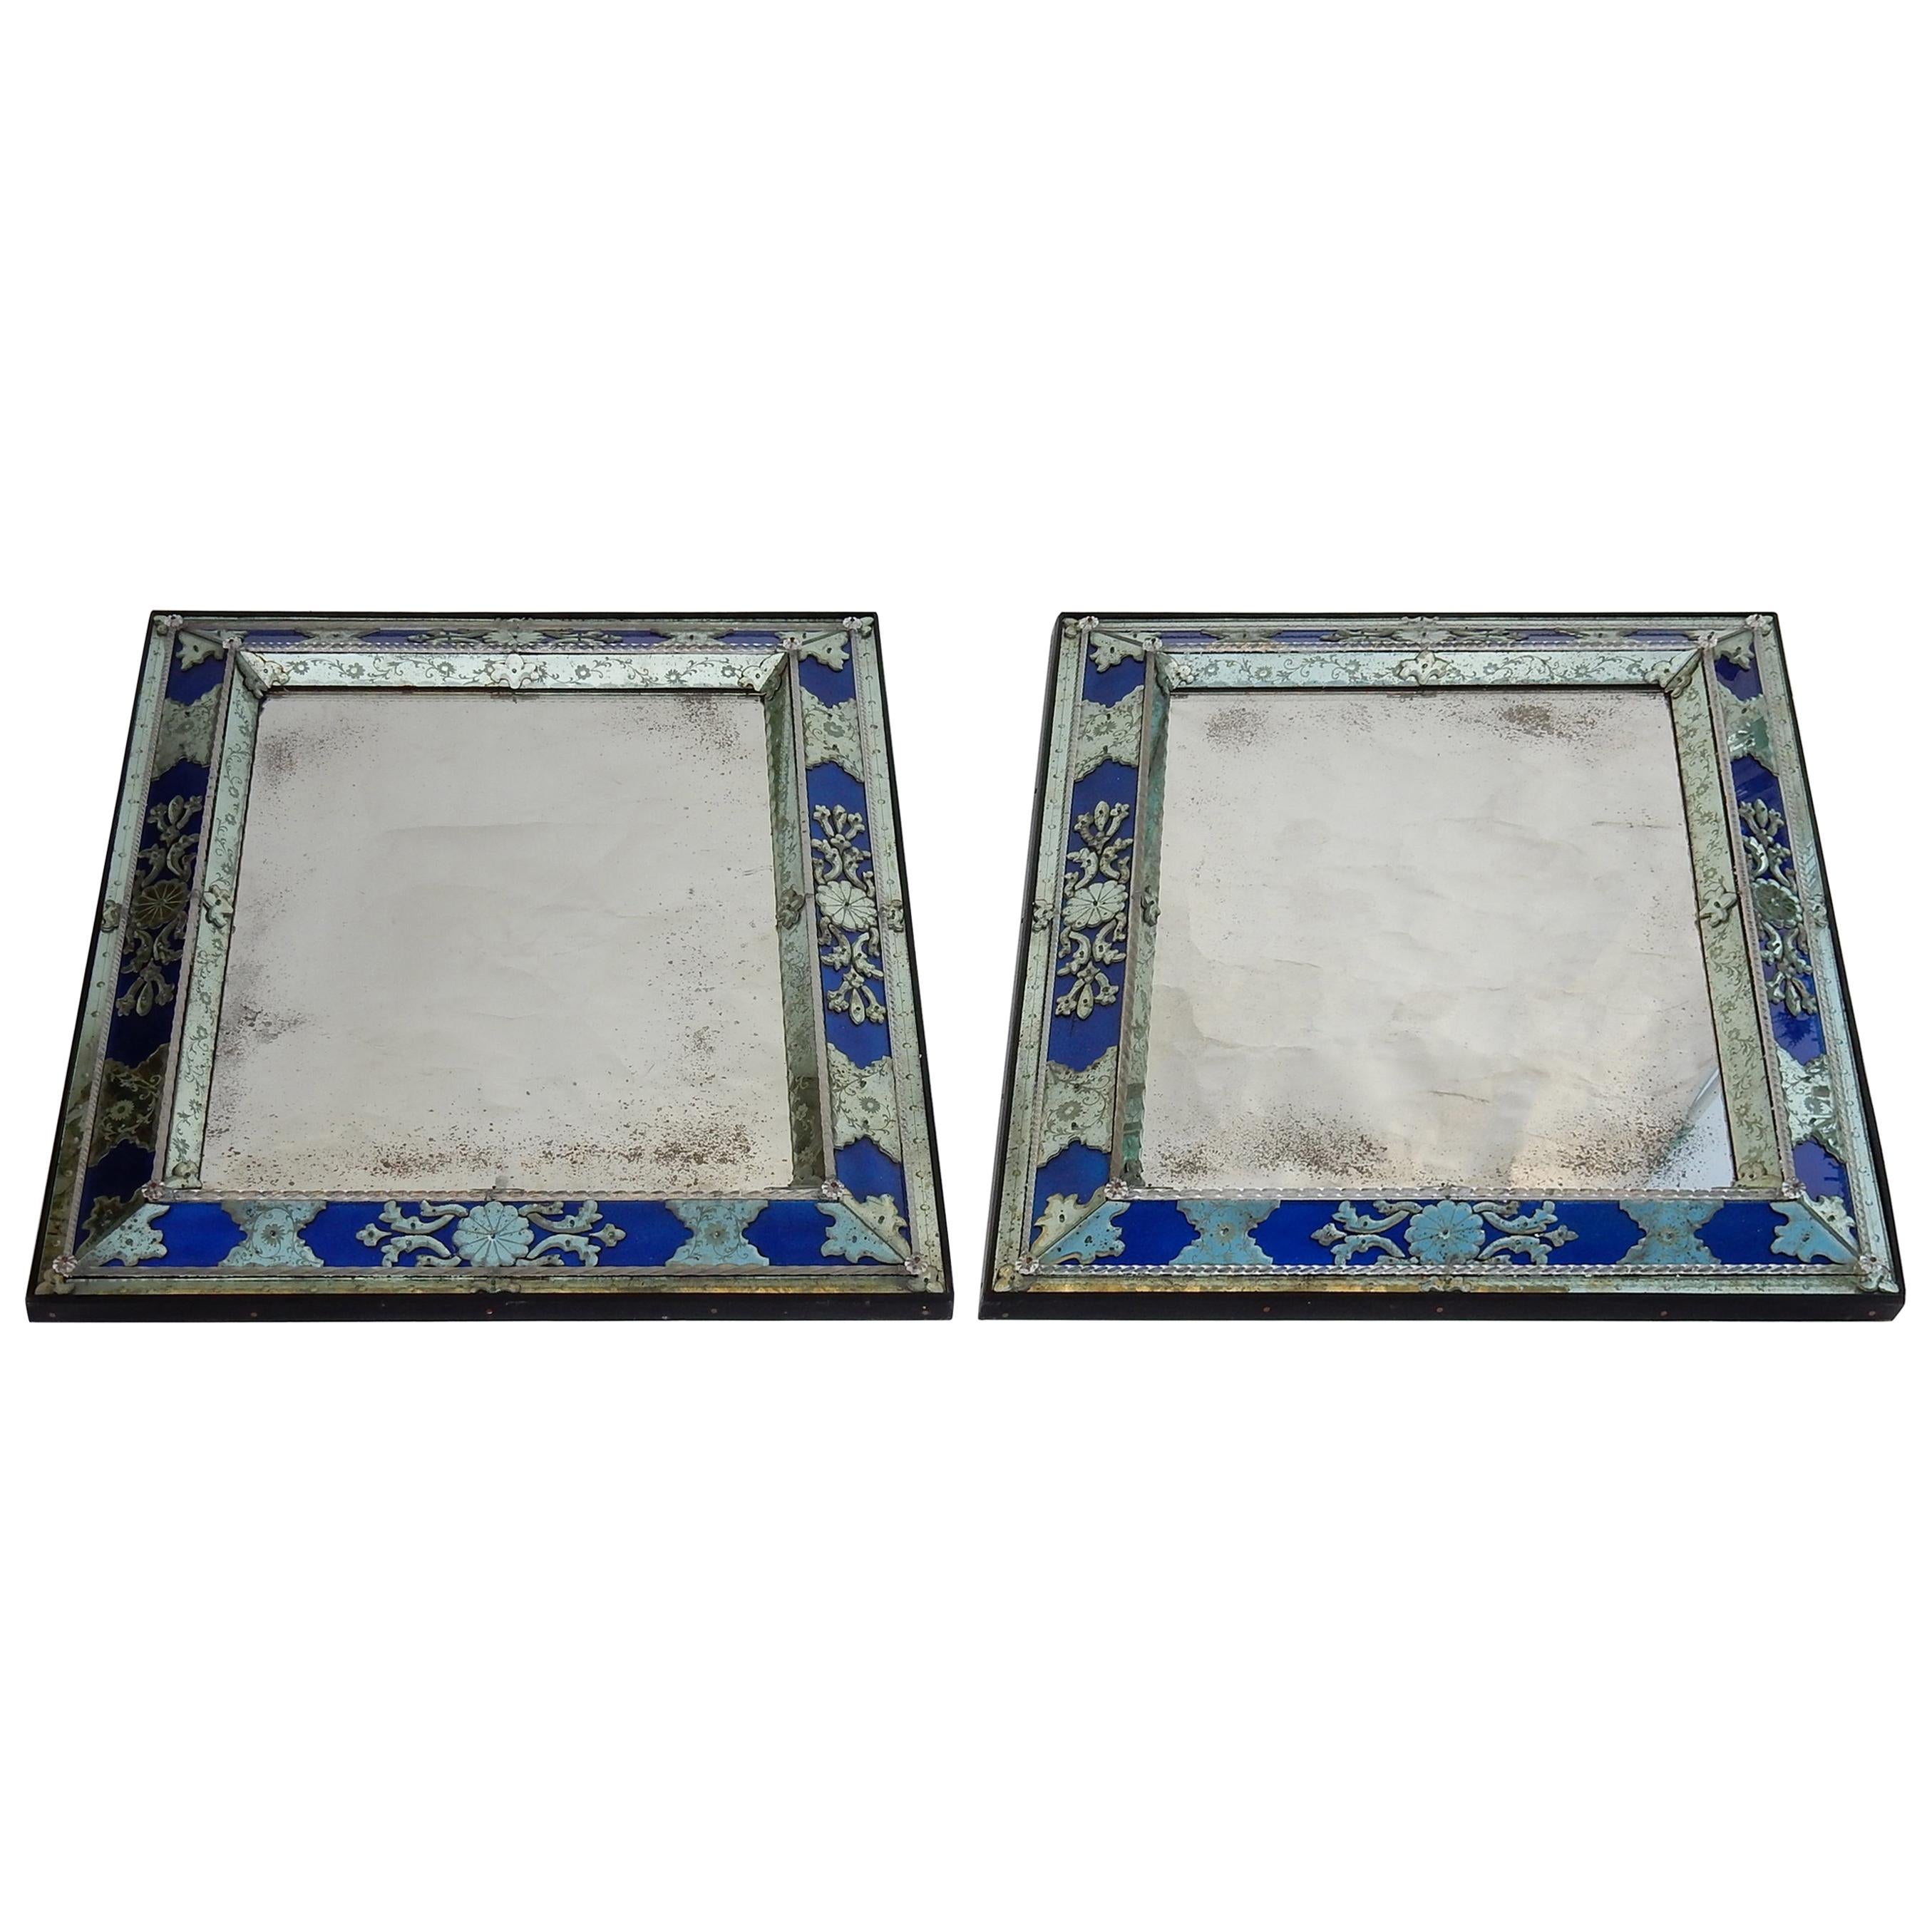 1970-1980 Pair of Louis XIV Style Venice Mirrors with Blue Glass Ornaments